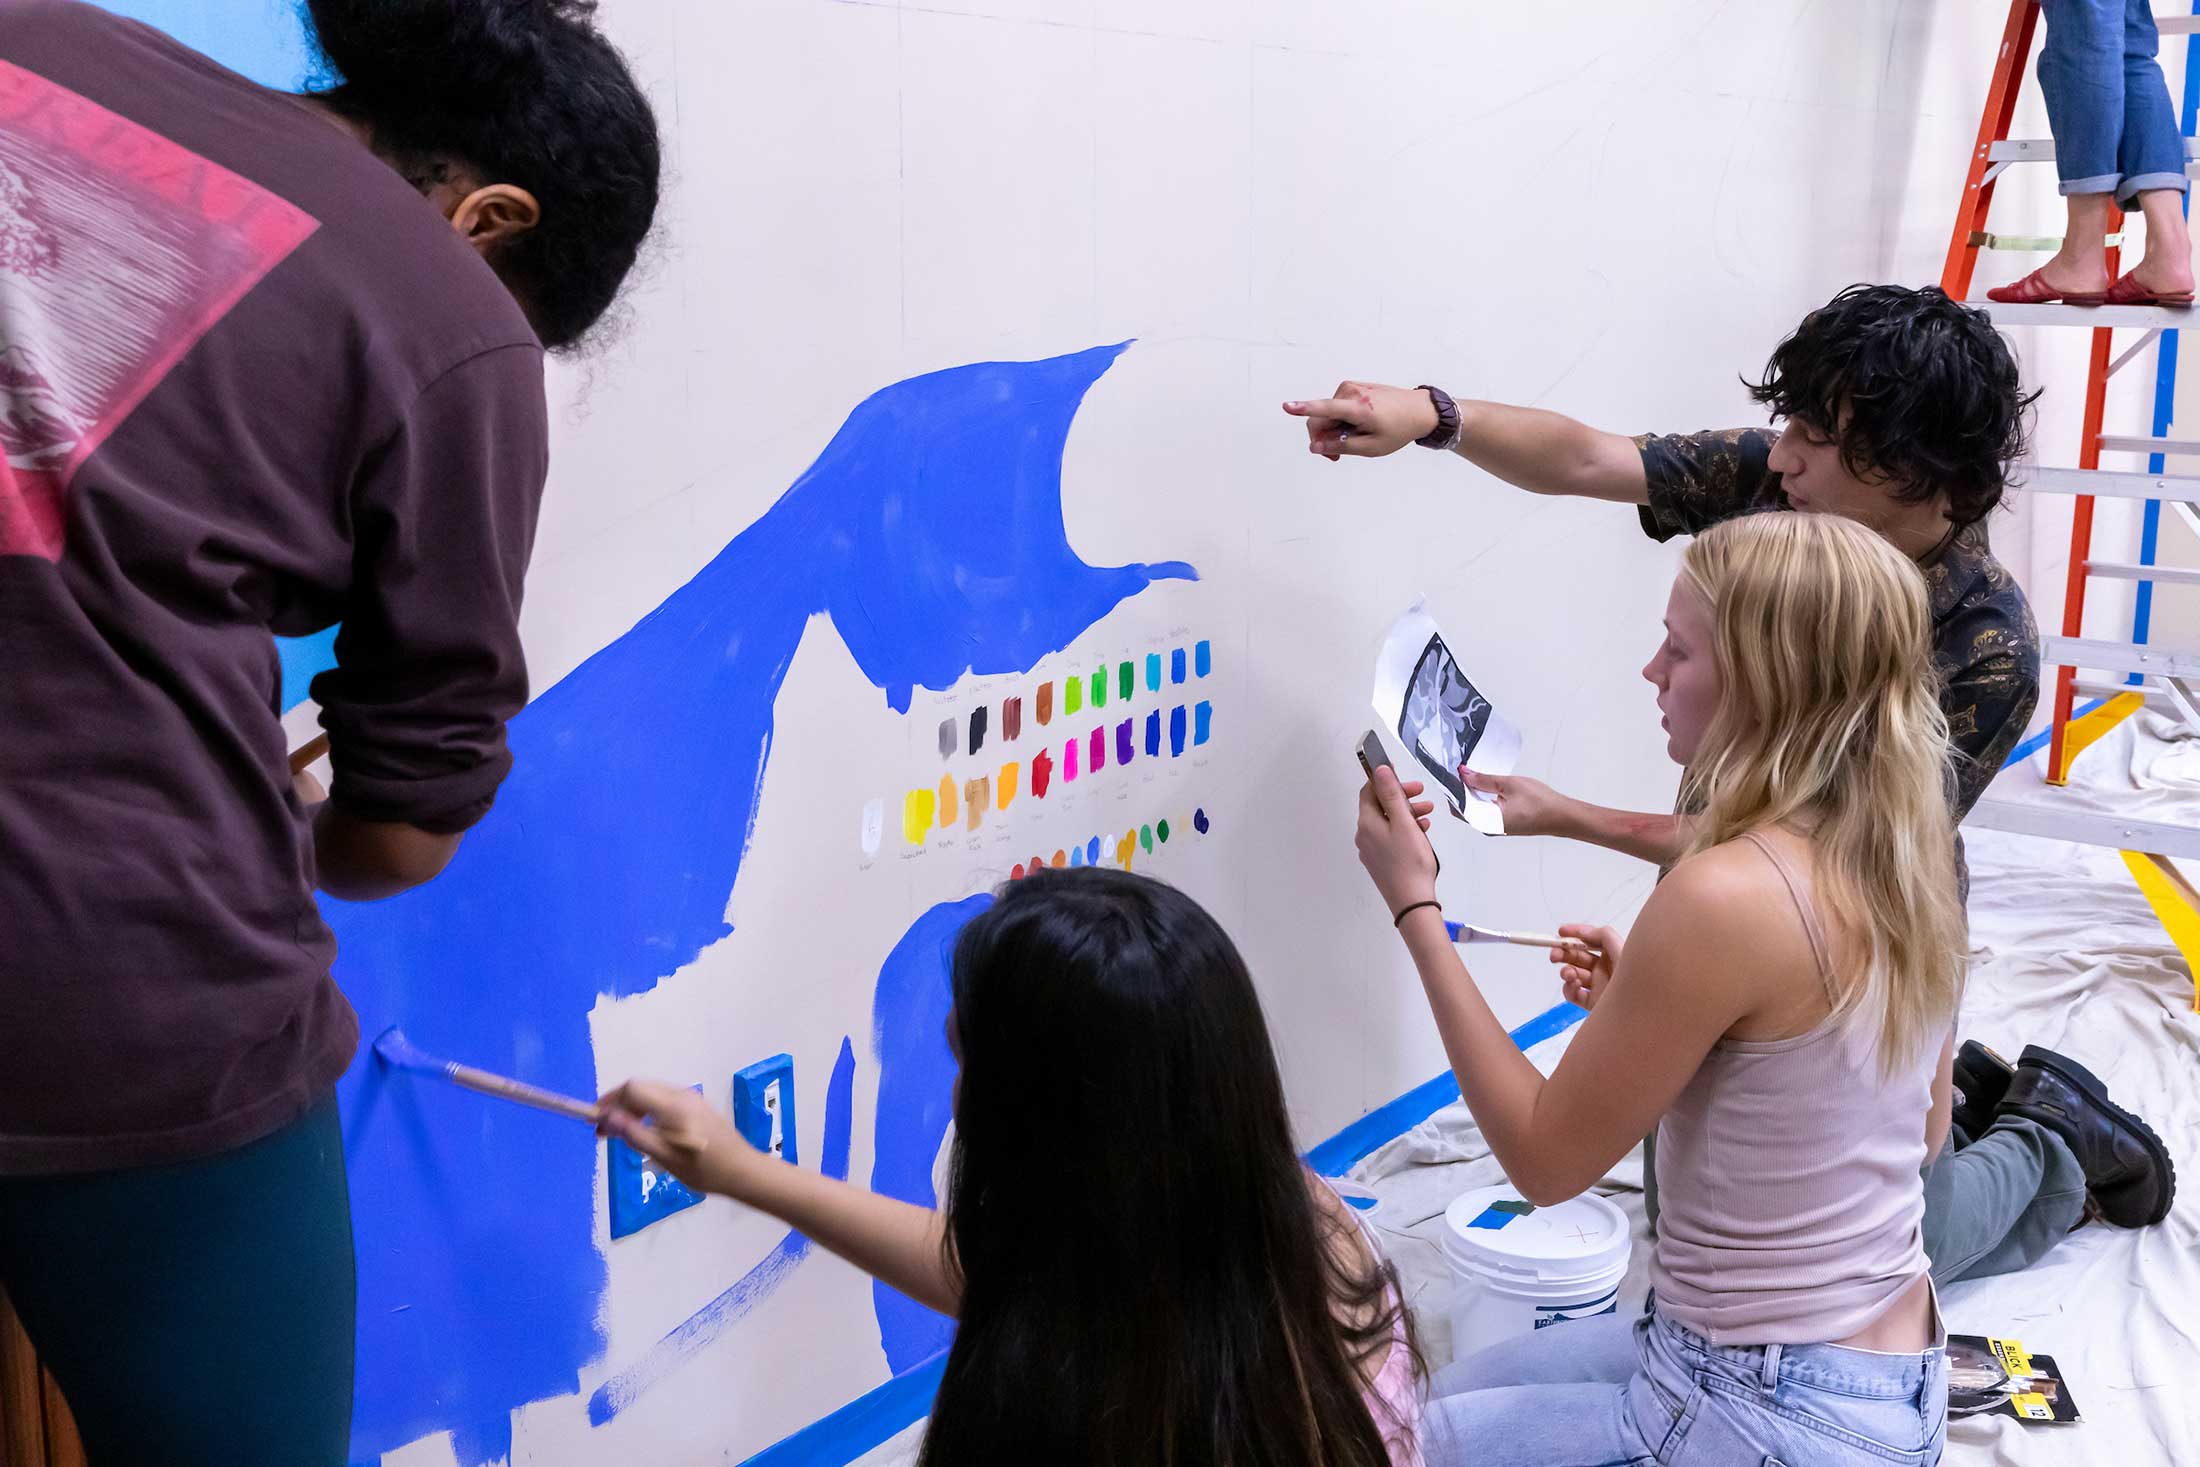 Four art students paint sections of the mural on a wall.